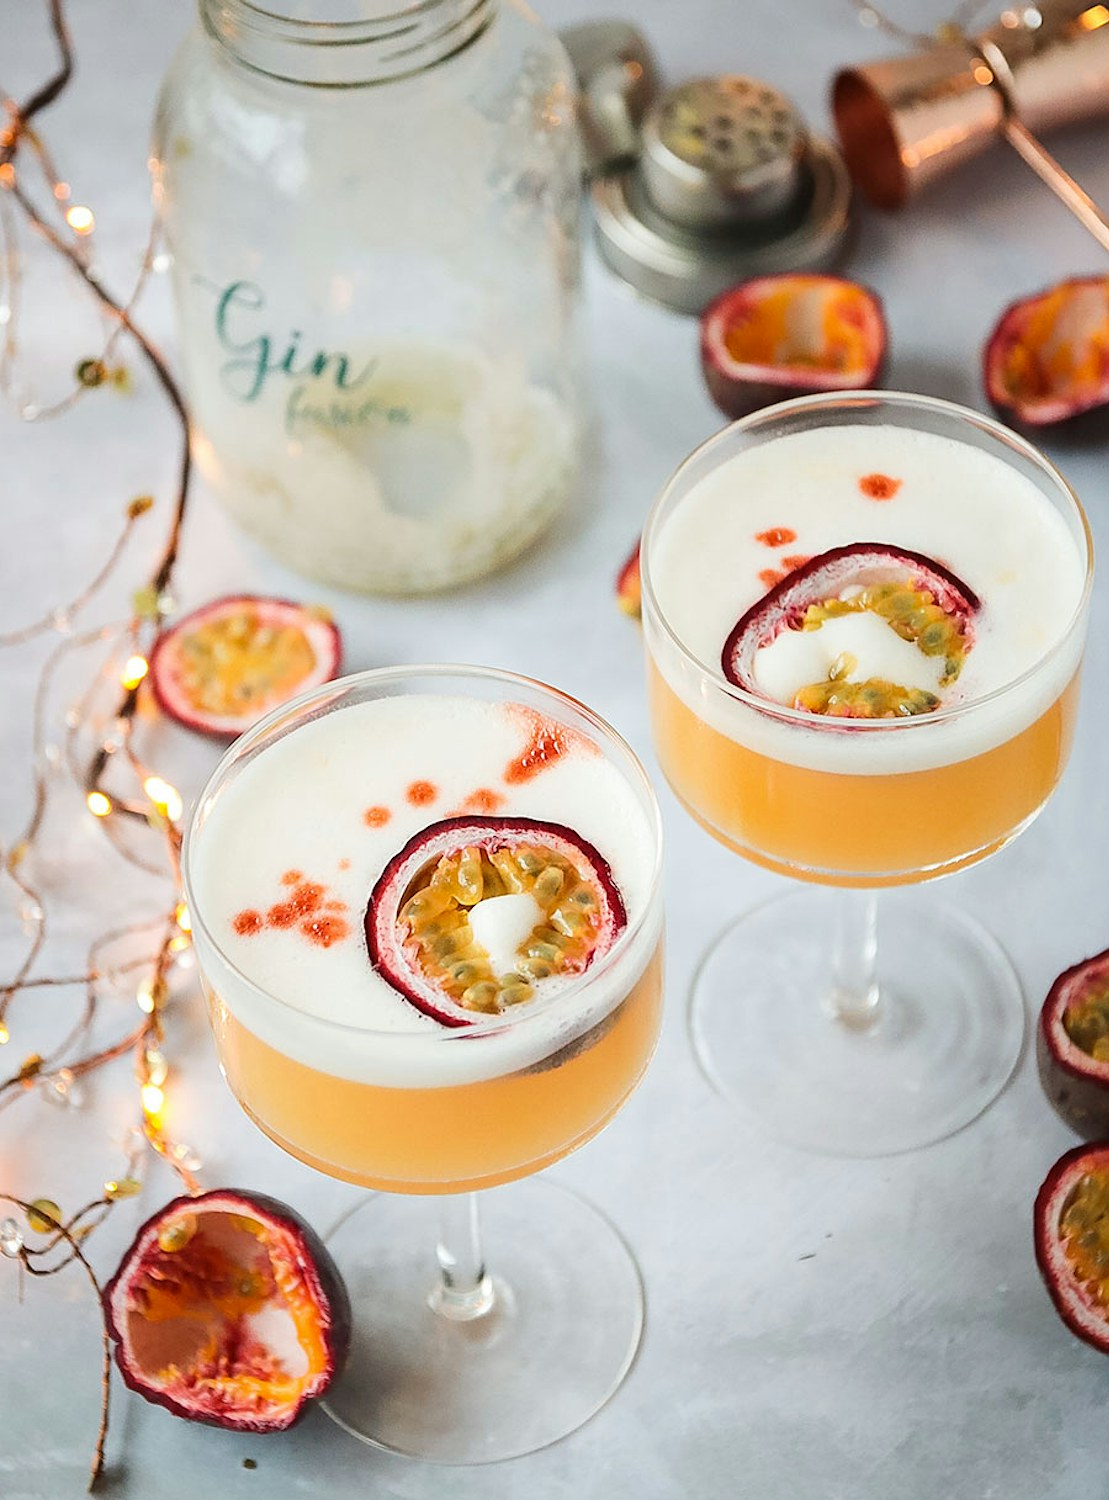 Passion Fruit Gin Sour